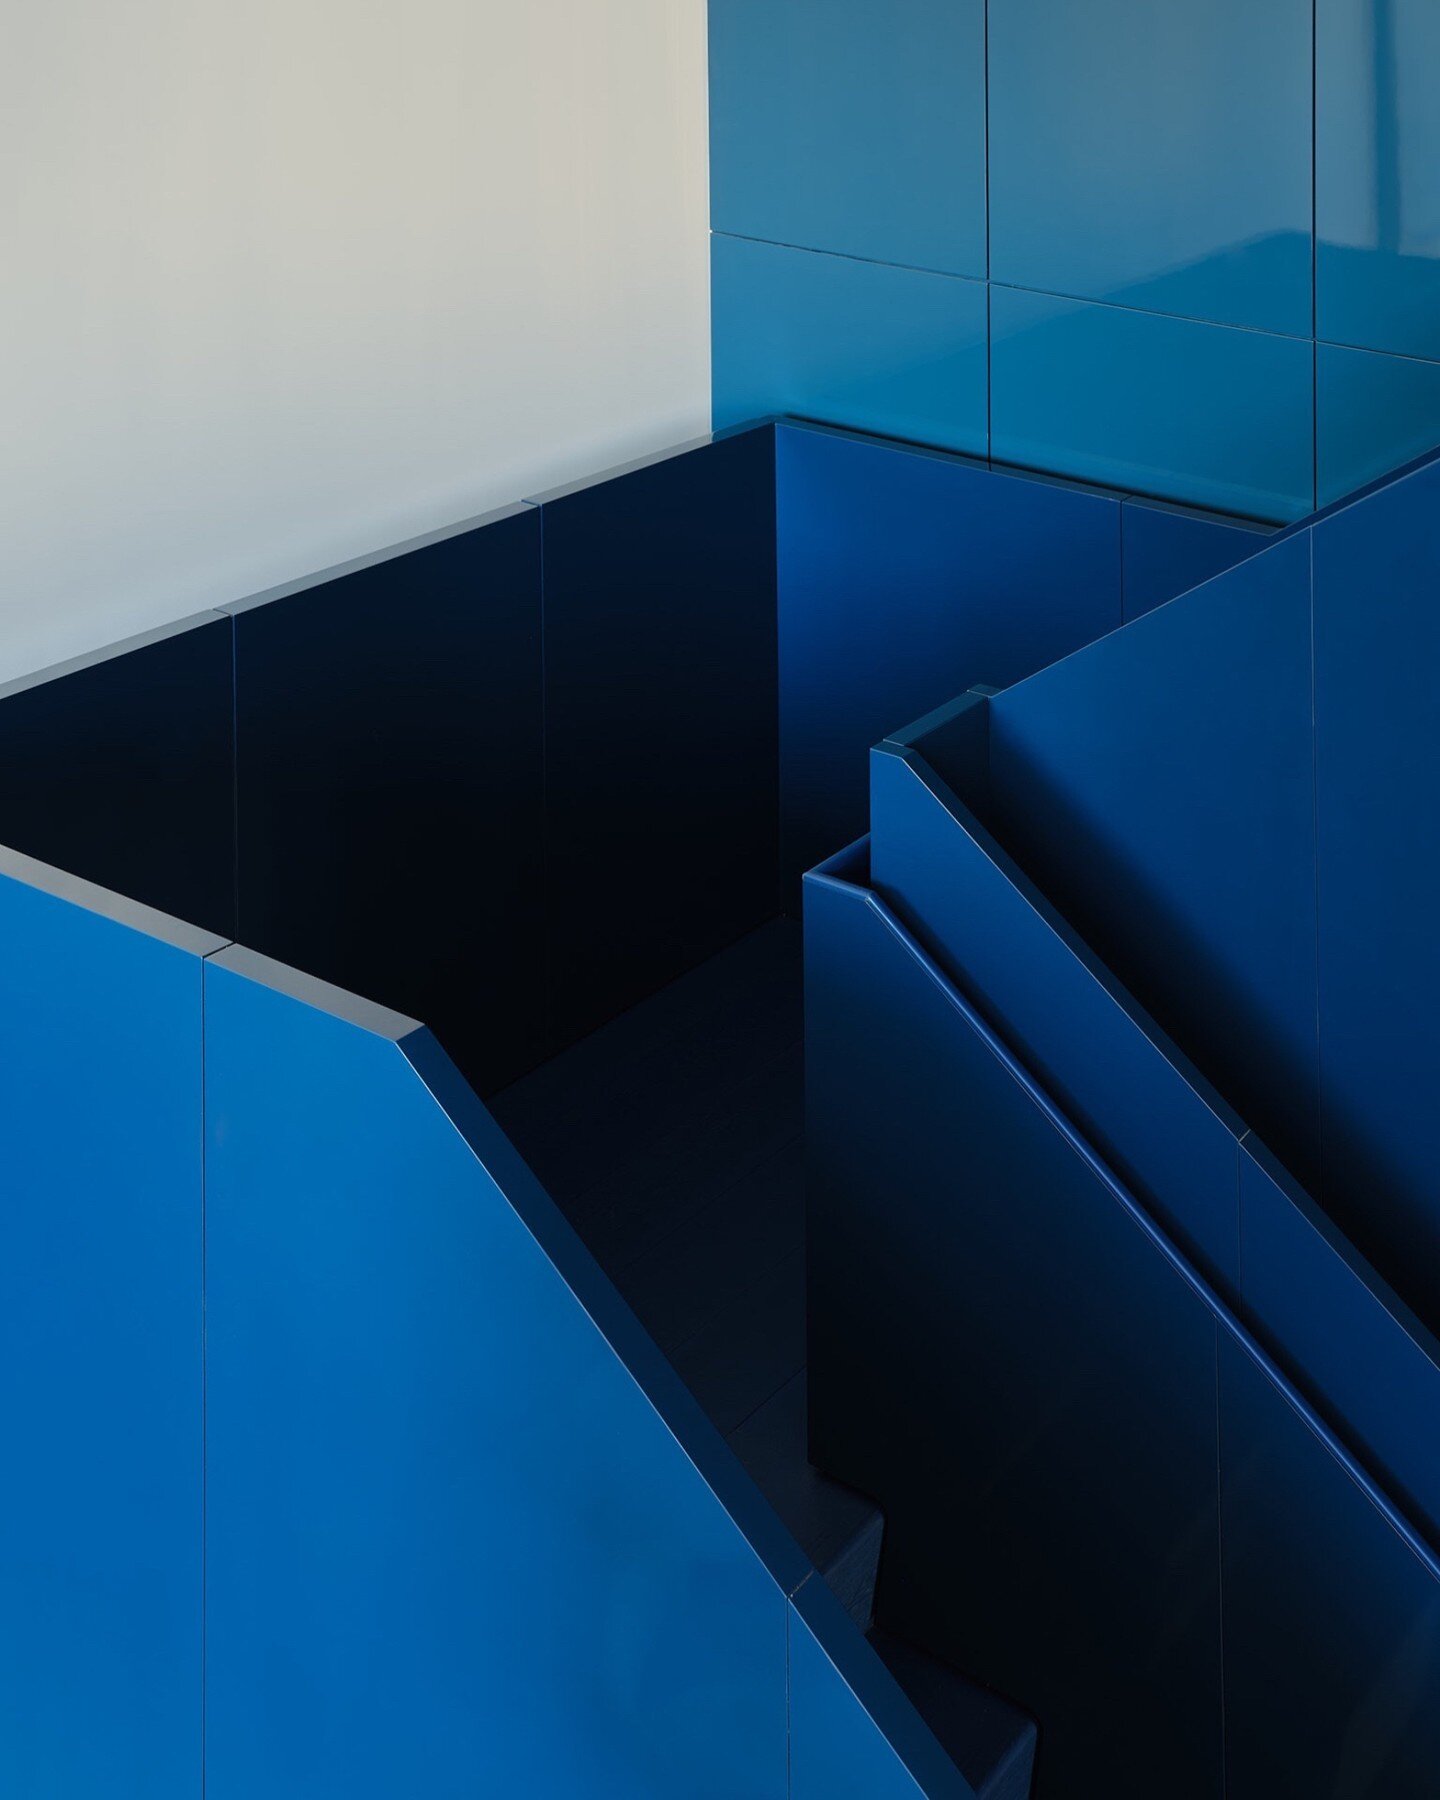 Please mind the step. A two-toned staircase clad with blue-lacquer panels.
______
Niagara On The Lake Residence
Photo: @2spacephoto


#acdo #interiordesign #residentialdesign #stairdesign #interiorinspo #interiorstyle #lacquer
#niagara